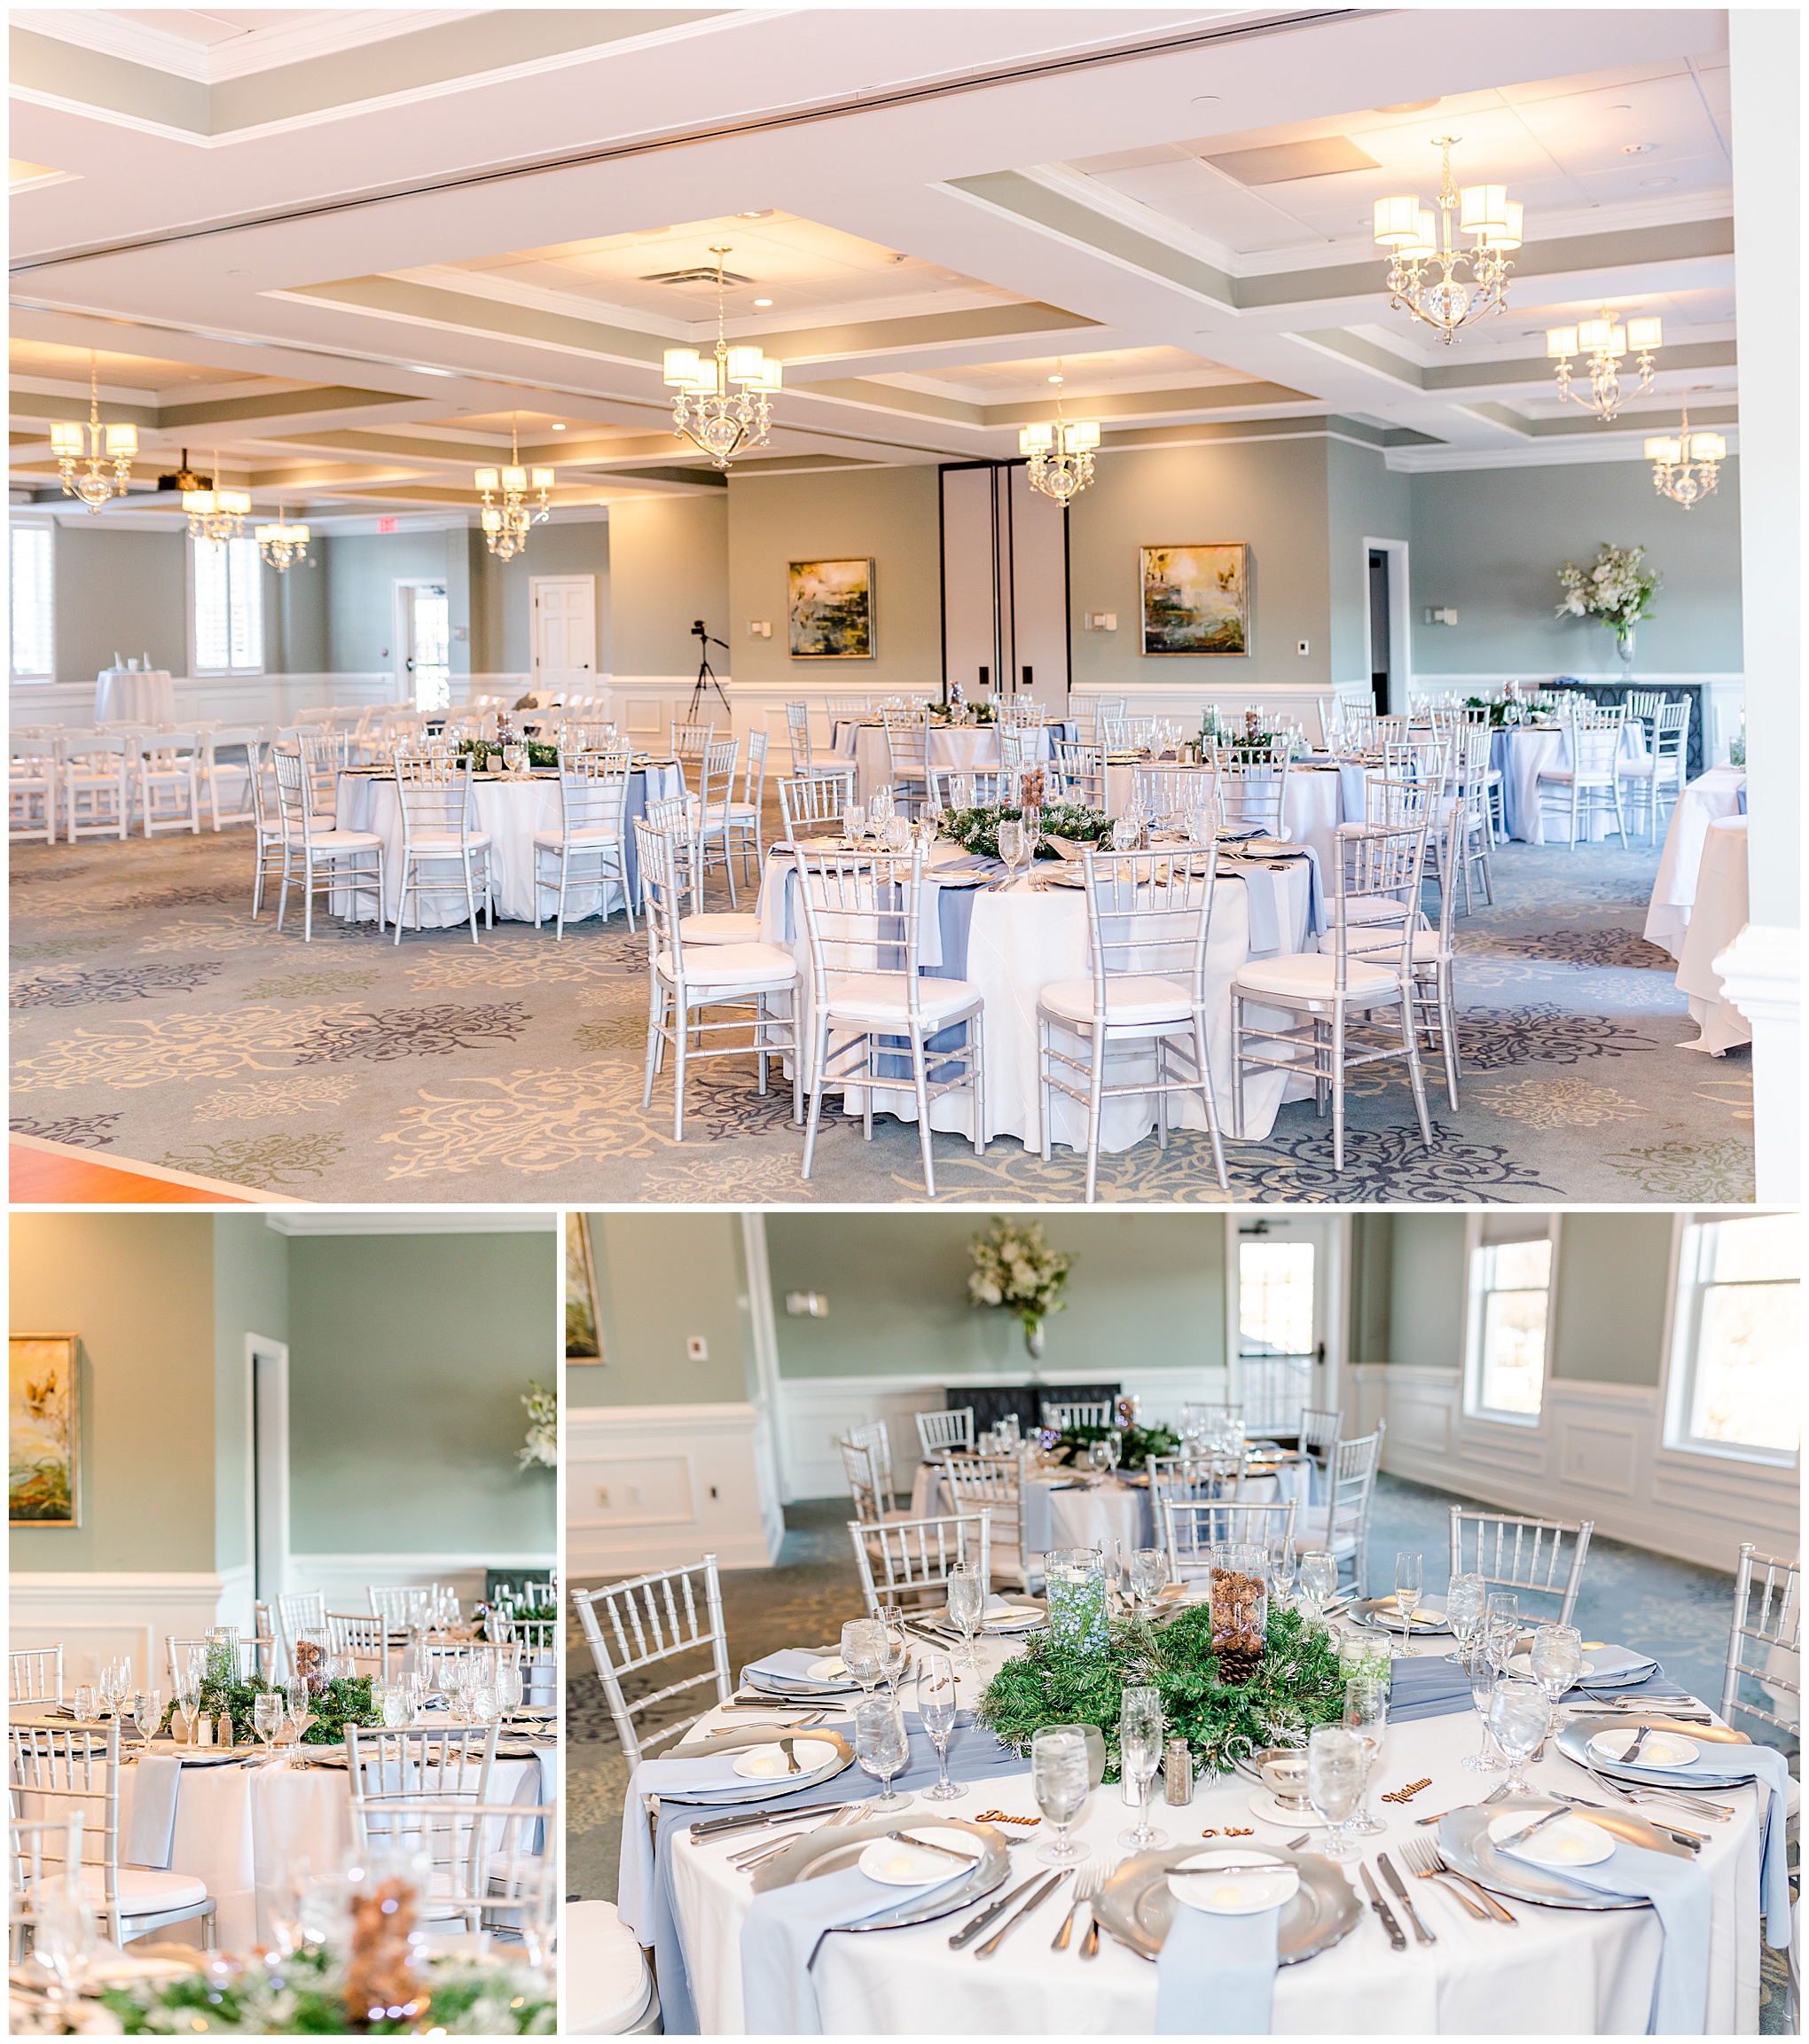 Regency at Dominion Valley wedding, Virginia country club wedding, Haymarket Virginia wedding, northern Virginia wedding, winter wedding, winter wedding aesthetic, DC micro wedding, northern Virginia wedding venues, classic winter wedding, Rachel E.H. Photography, wedding venue, pinecone centerpieces, white round tables